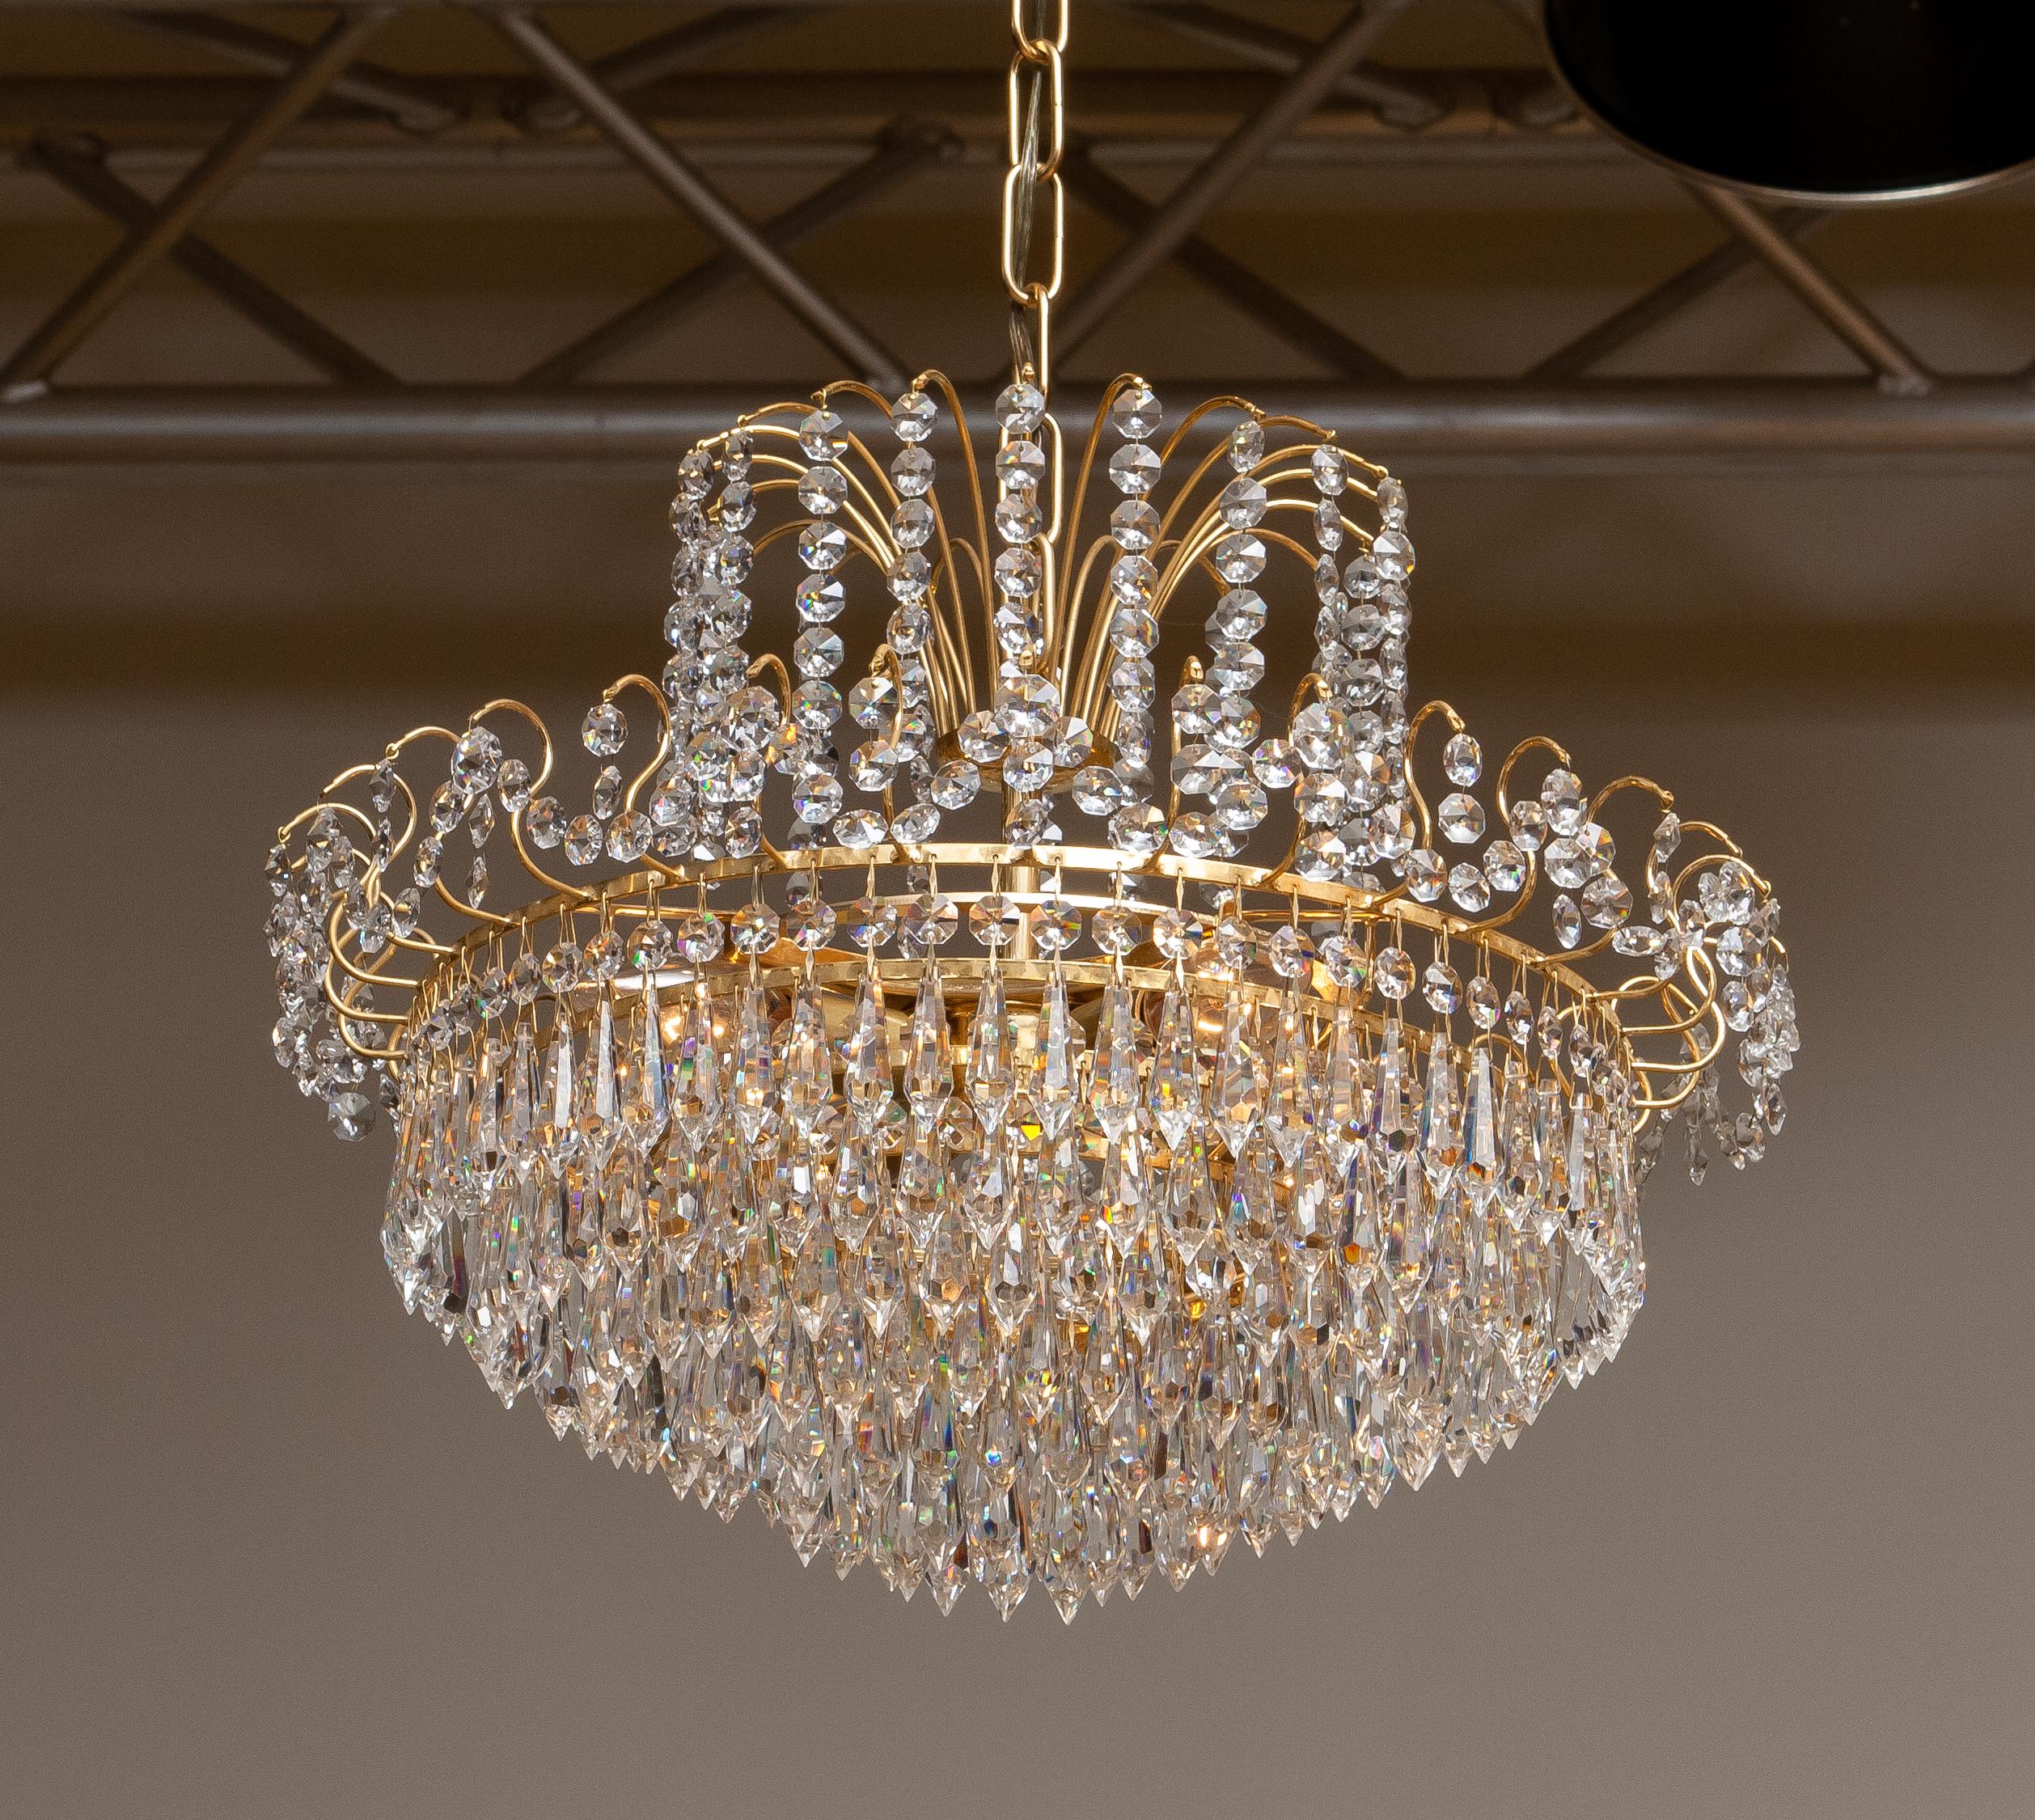 Neoclassical Revival 1970s, Gold-Plated and Faceted Crystal Chandelier Attributed to Rejmyre Sweden